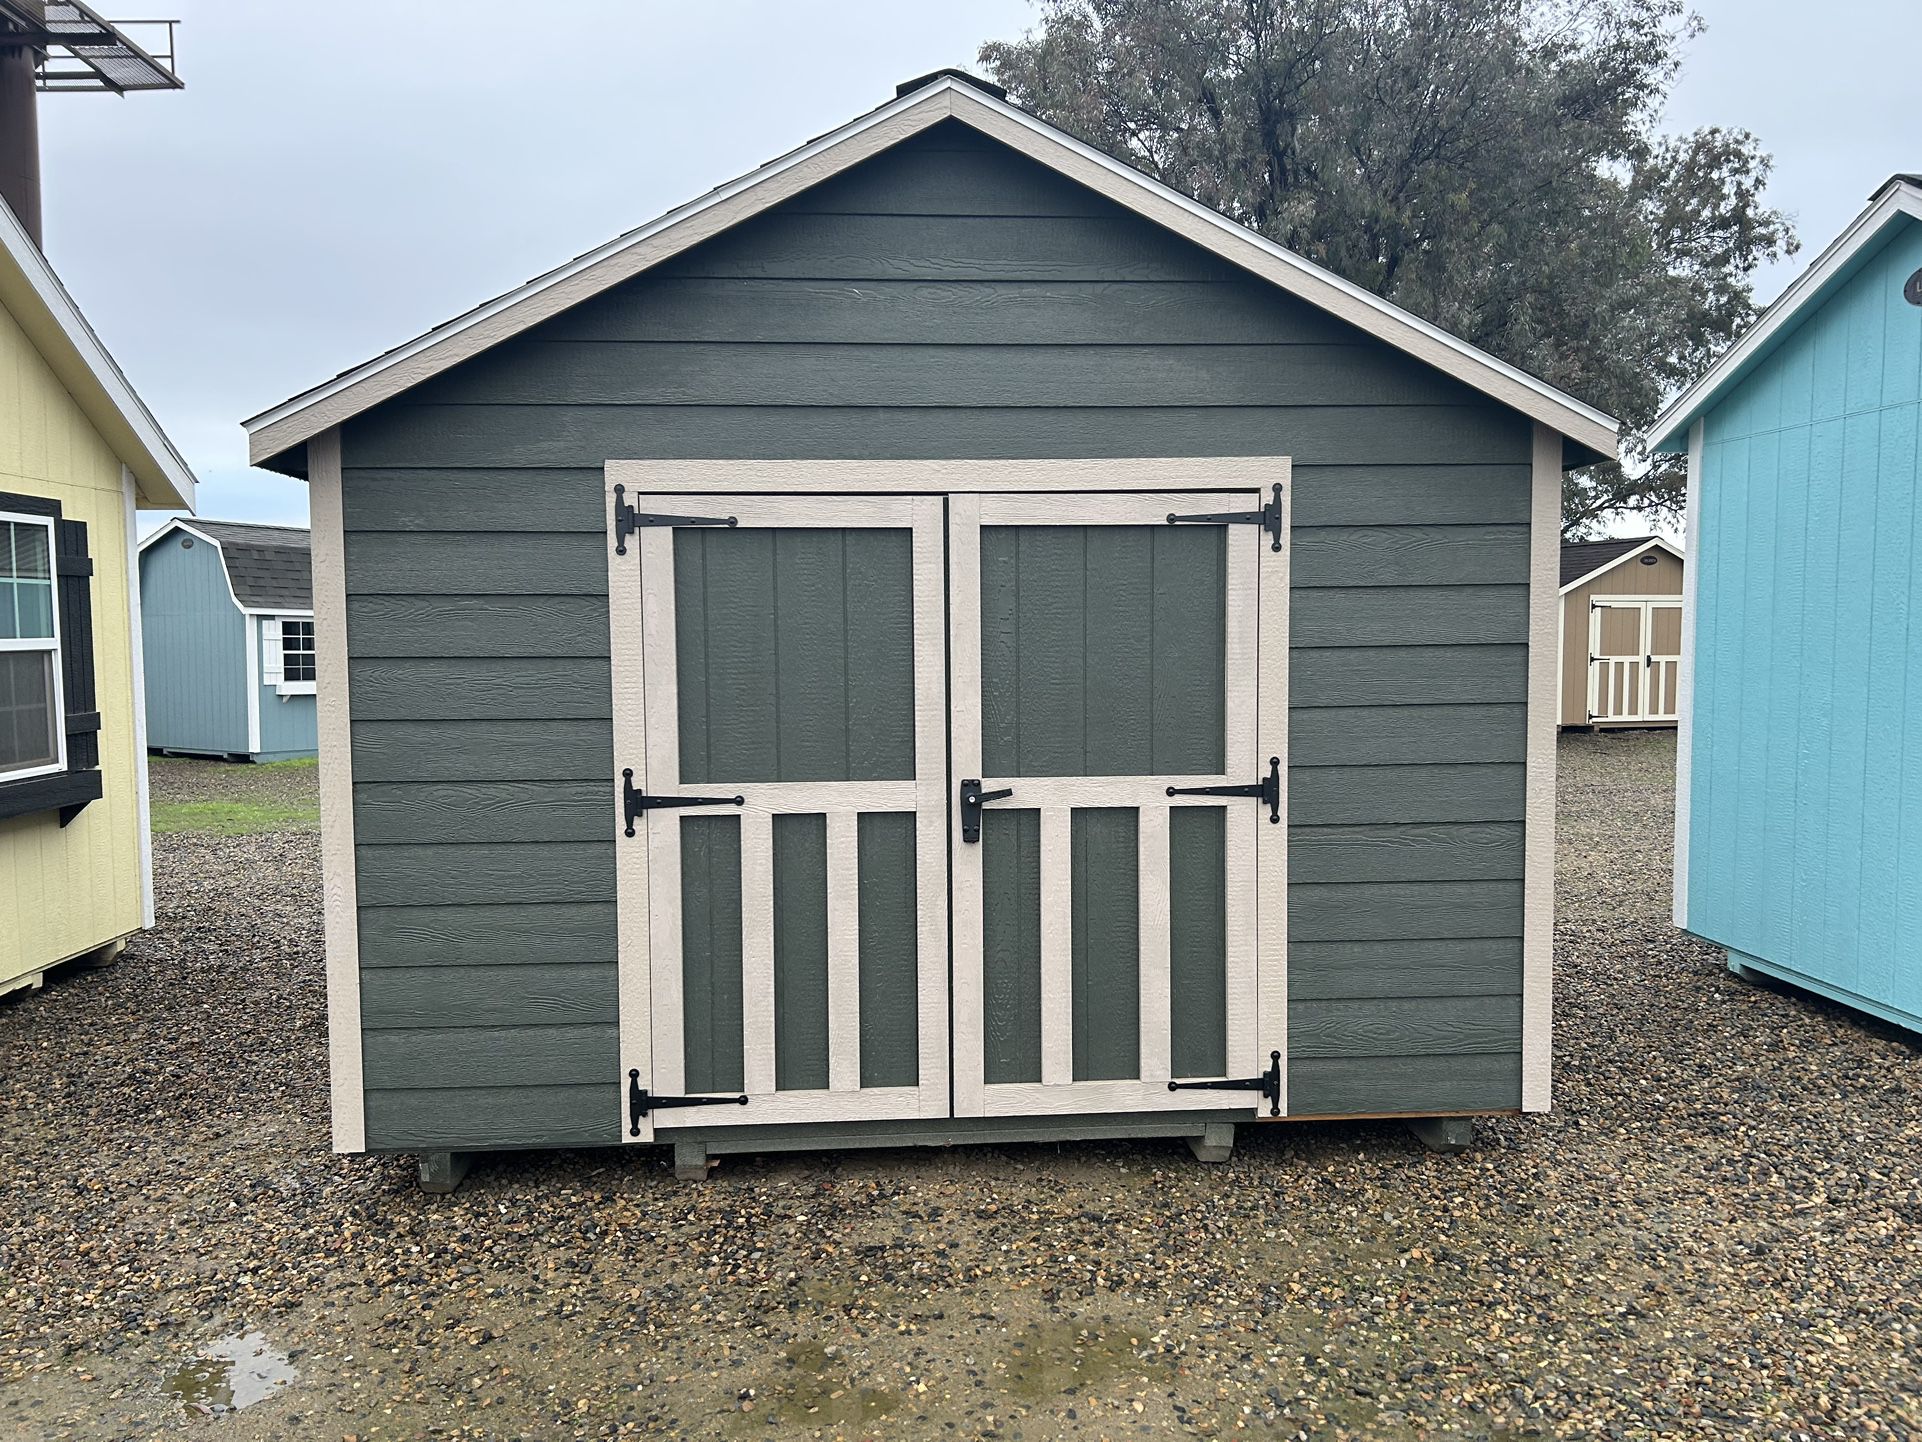 12x16  Shed 